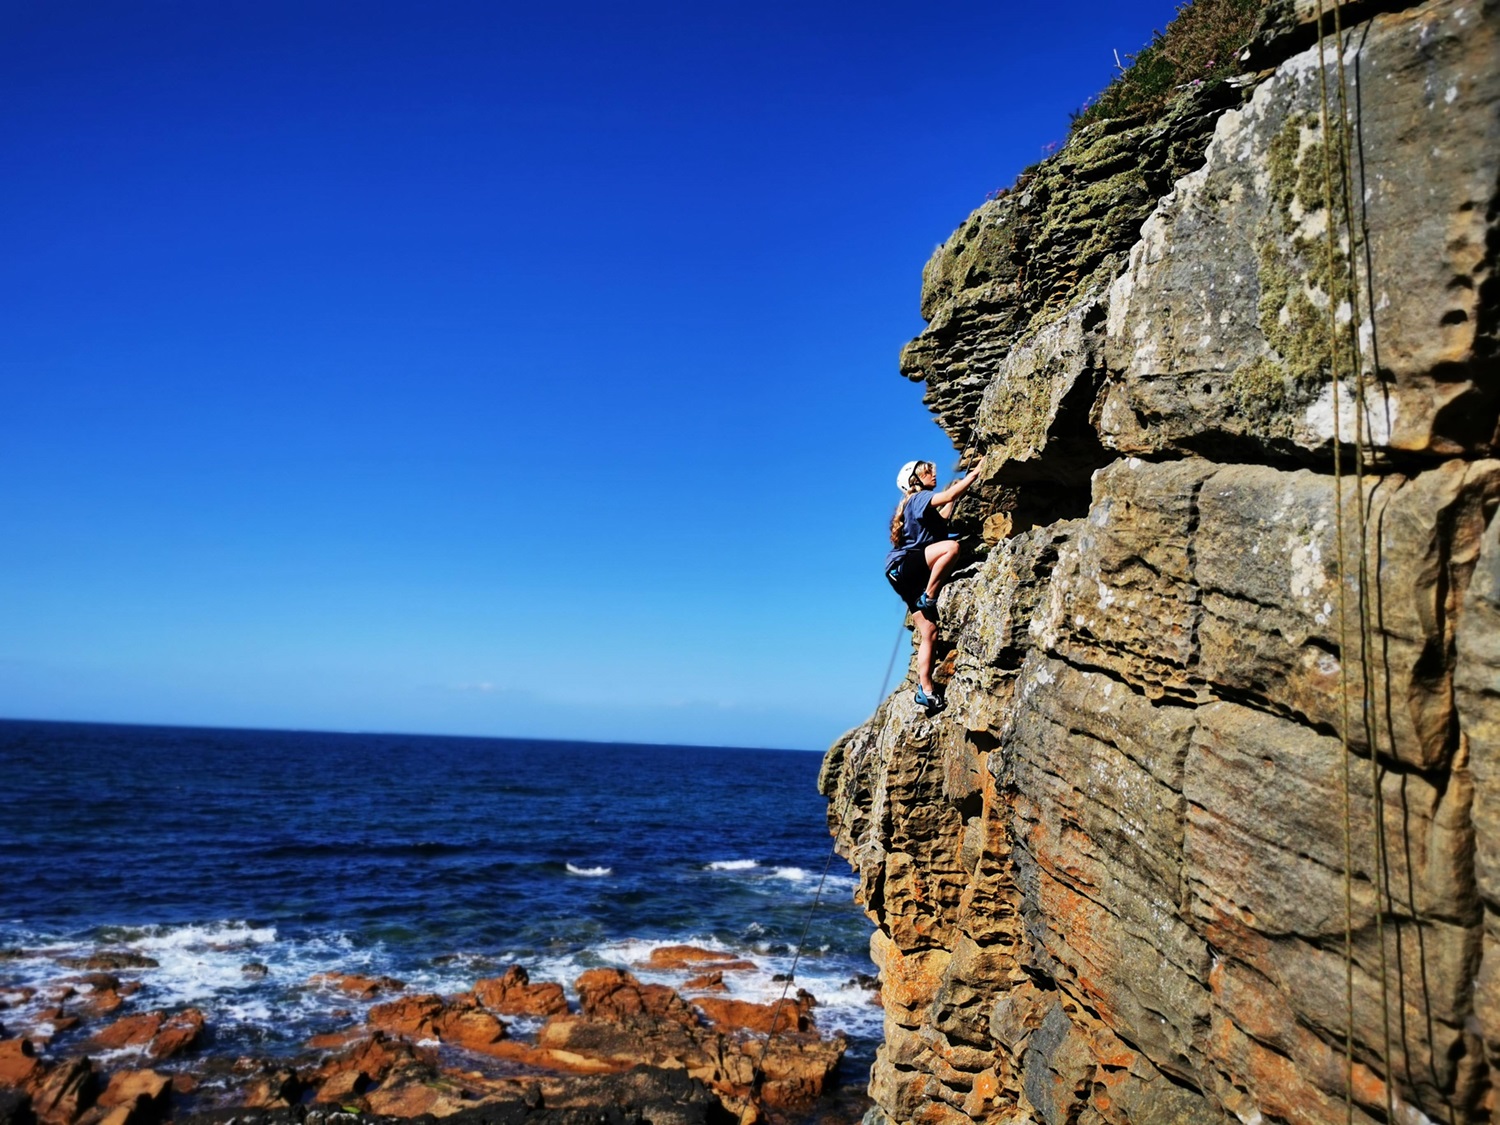 Deep blue sky with blue sea, and rocks in the foreground. A cliff juts out on the right with a woman stretching up to climb to the next hand and foot hold. Ropes can be seen hanging down the cliff face. It is a sunny day.